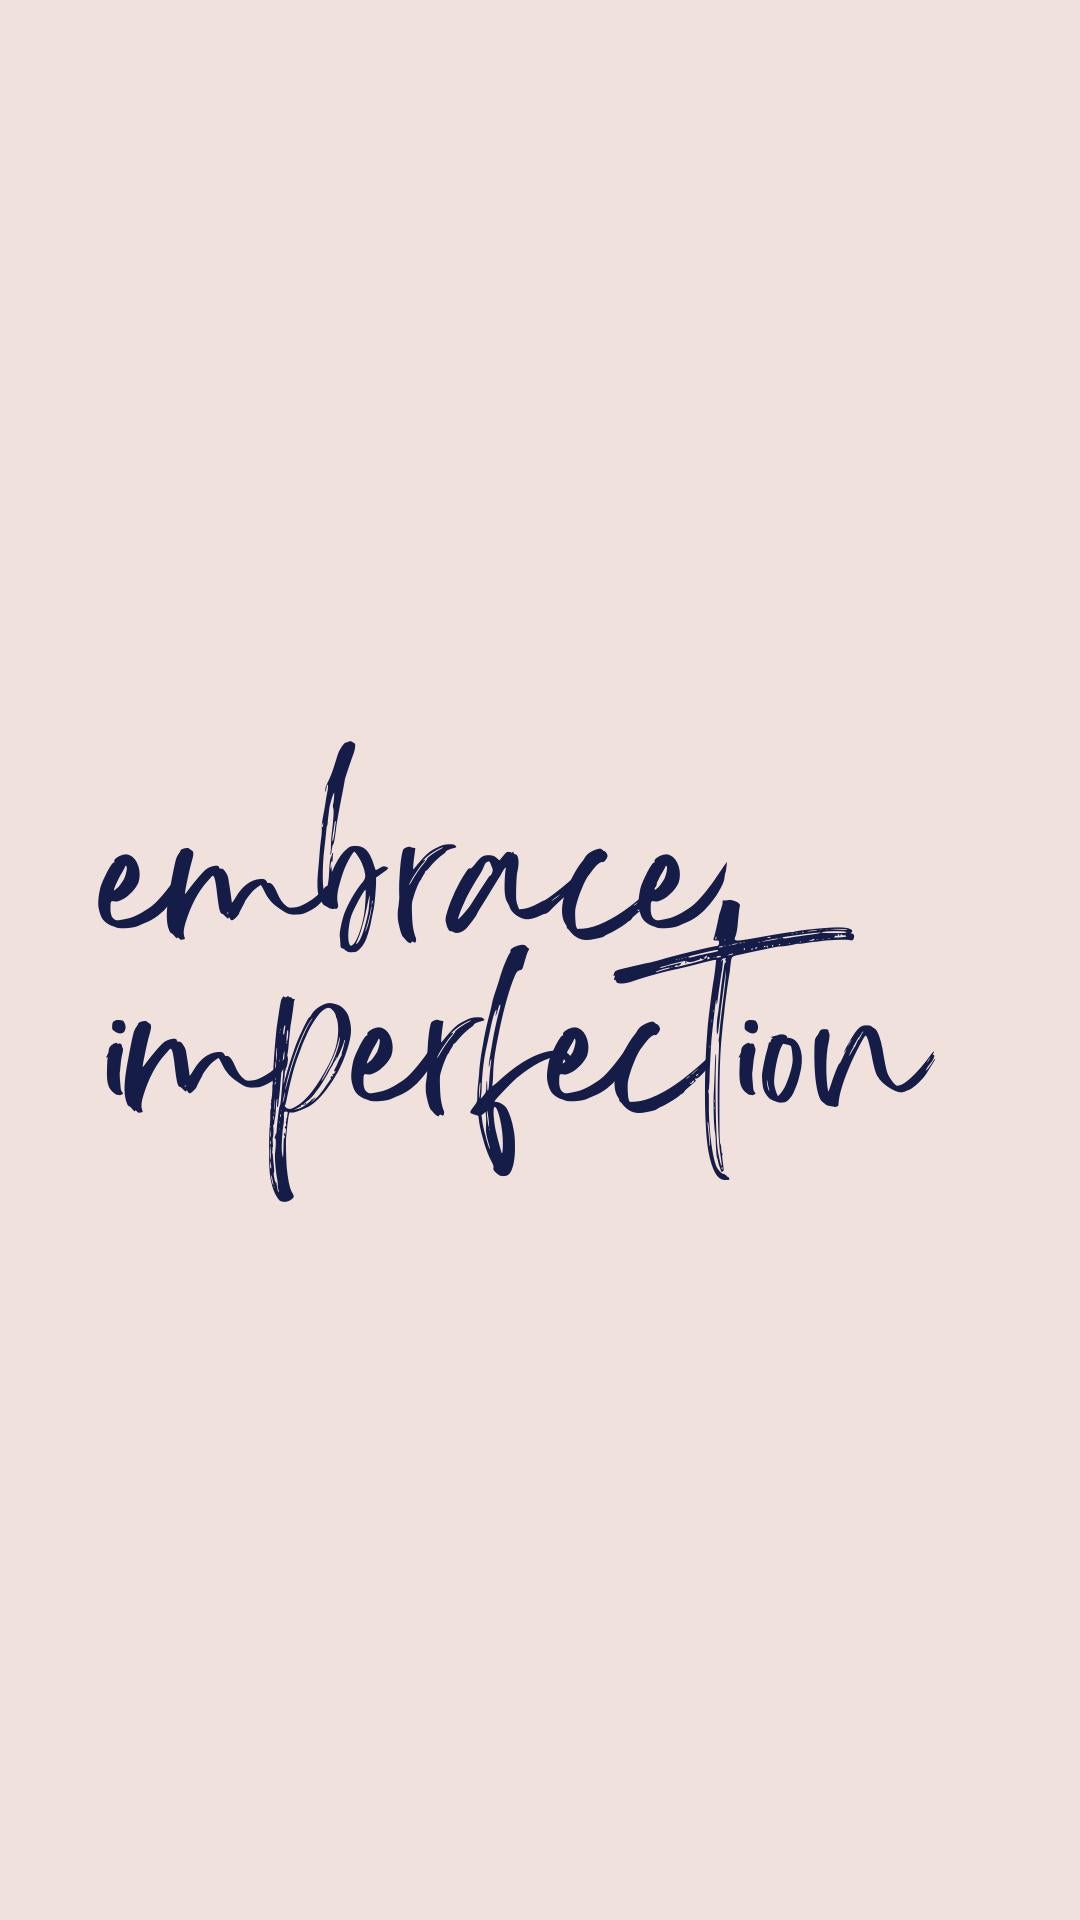 Artist Notes to Self #3: Embrace Imperfection